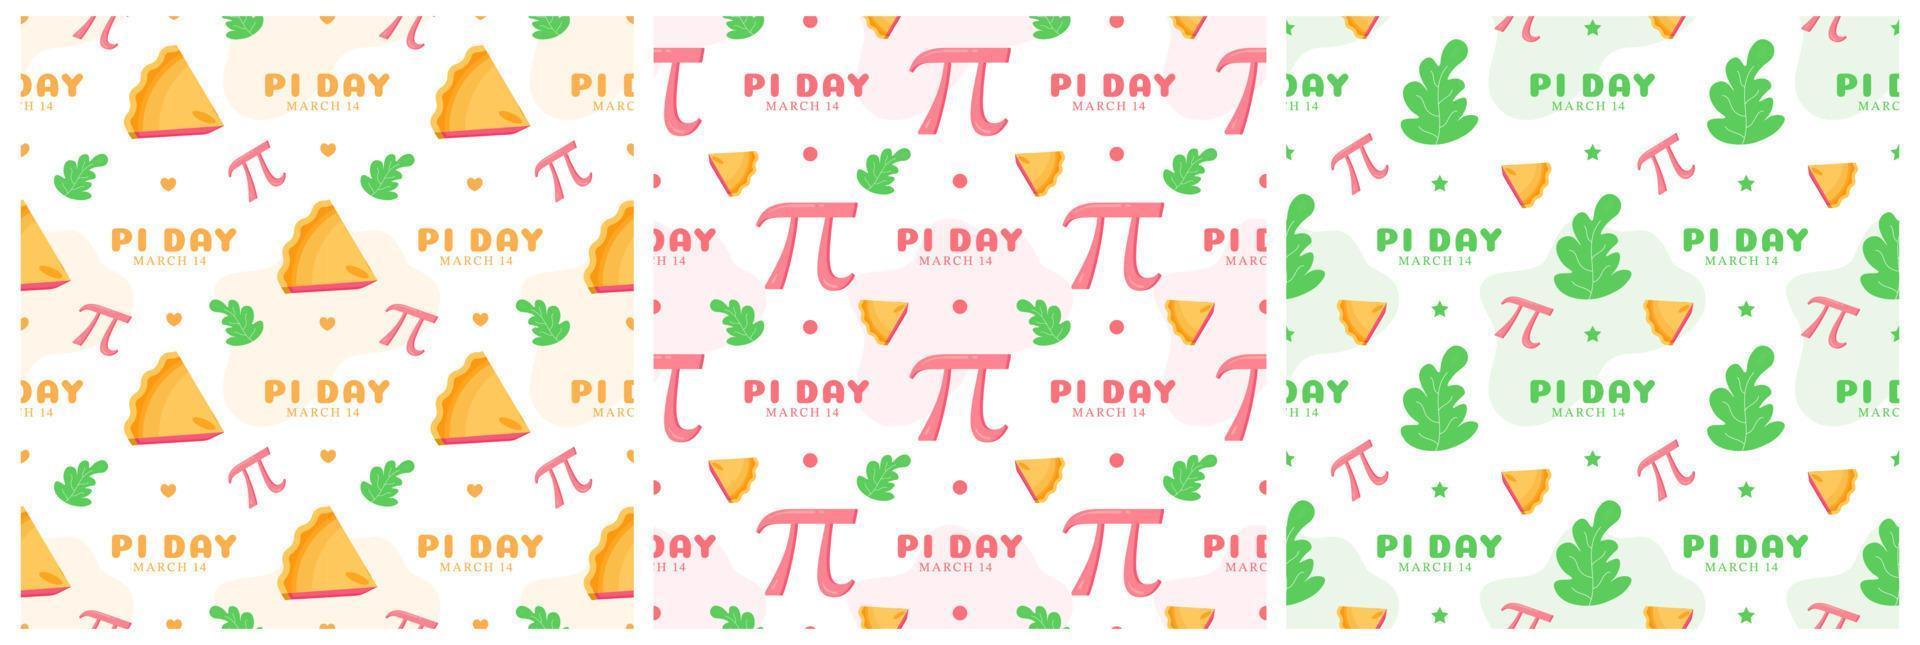 Set of Pi Day Seamless Pattern Design with Mathematical Constants or Baked Pie in Template Hand Drawn Cartoon Flat Illustration vector